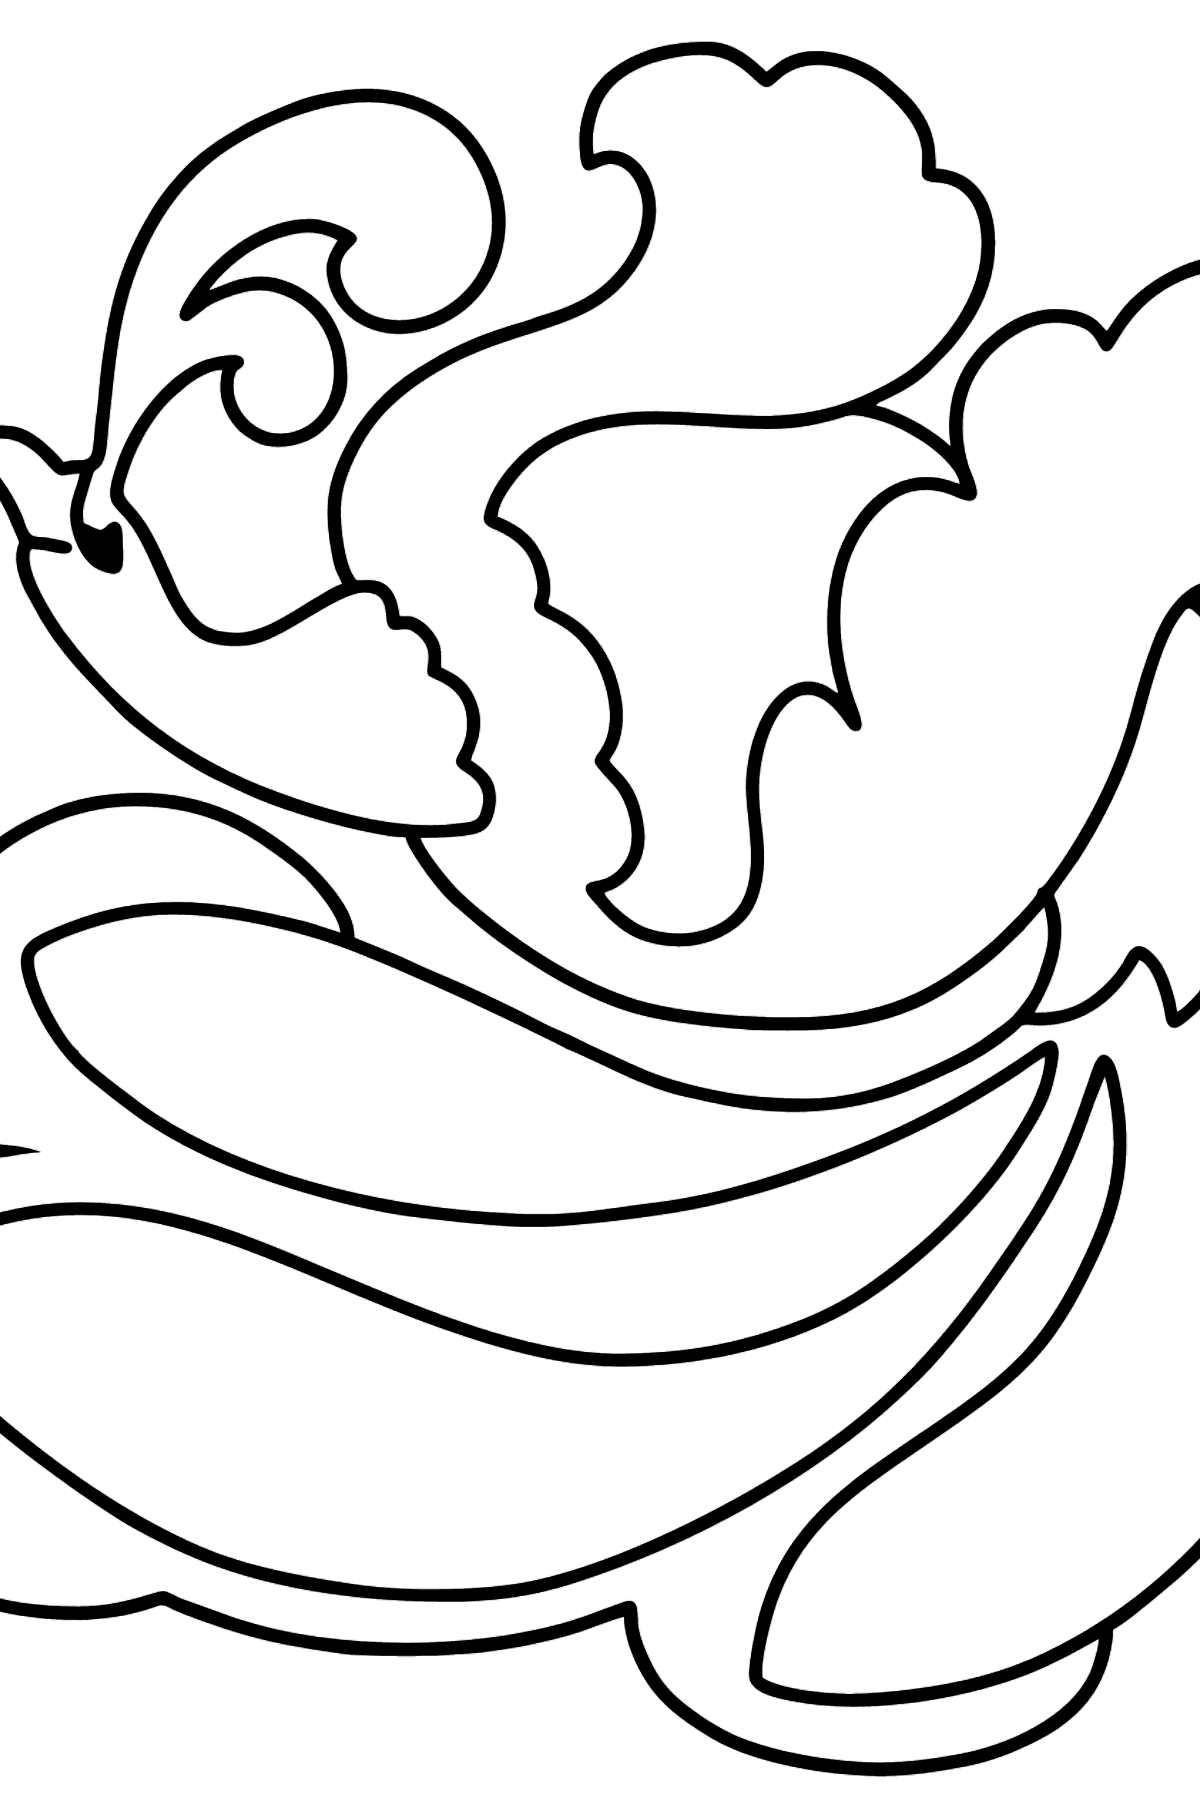 Firebird coloring page - Coloring Pages for Kids